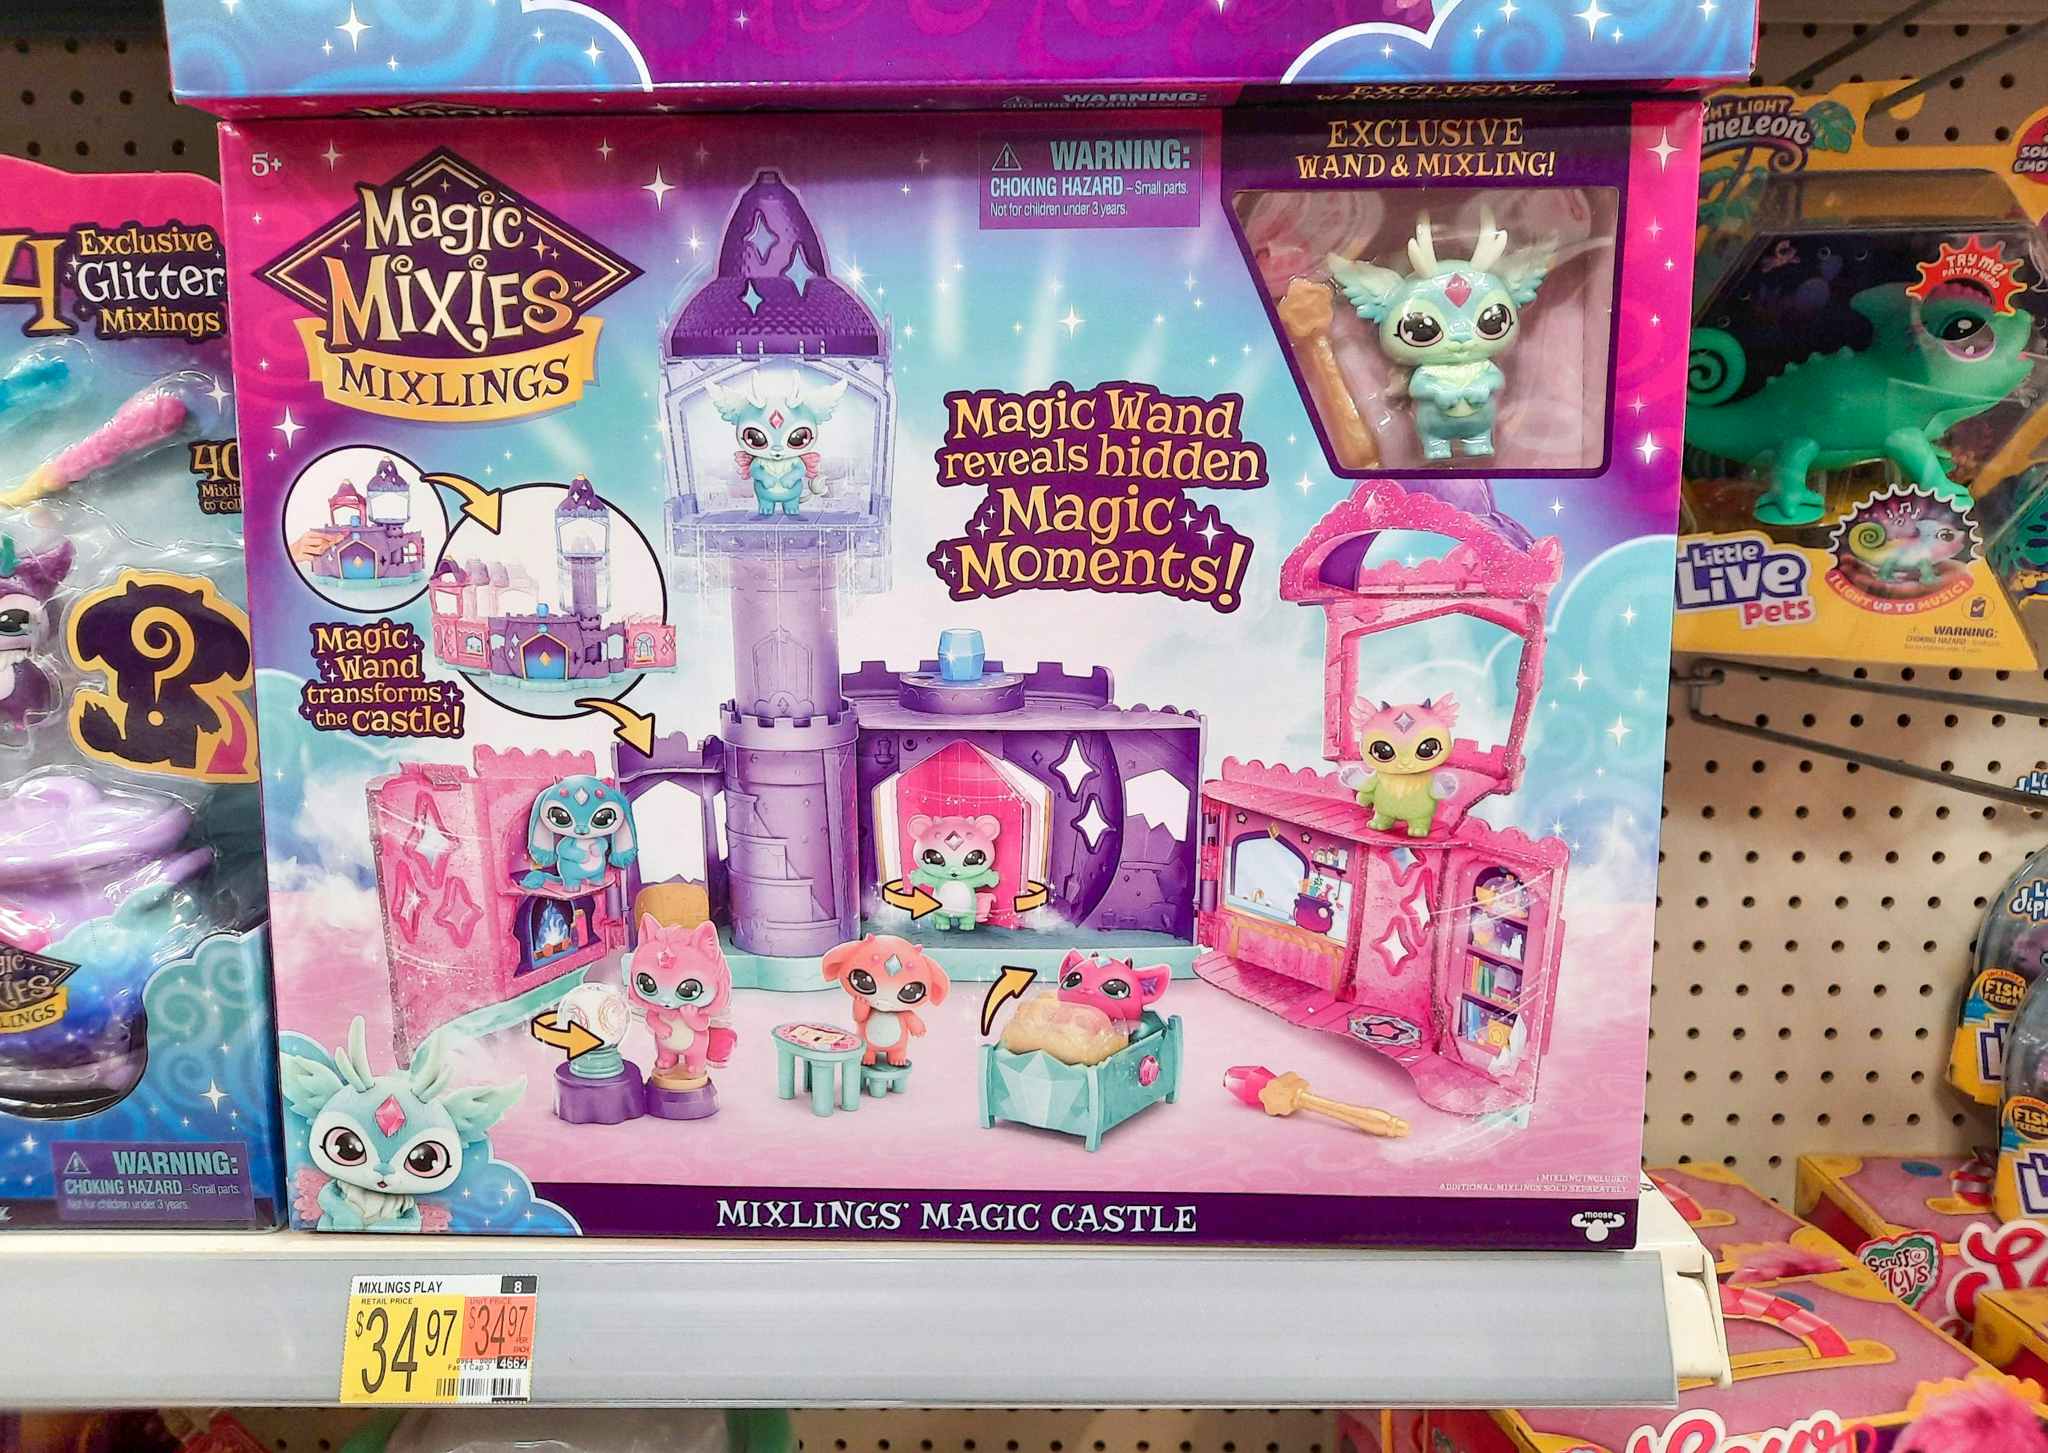 Magic Mixies Mixlings Magic Castle toy on shelf at Walmart. Price tag on shelf indicates that the price is $34.97.